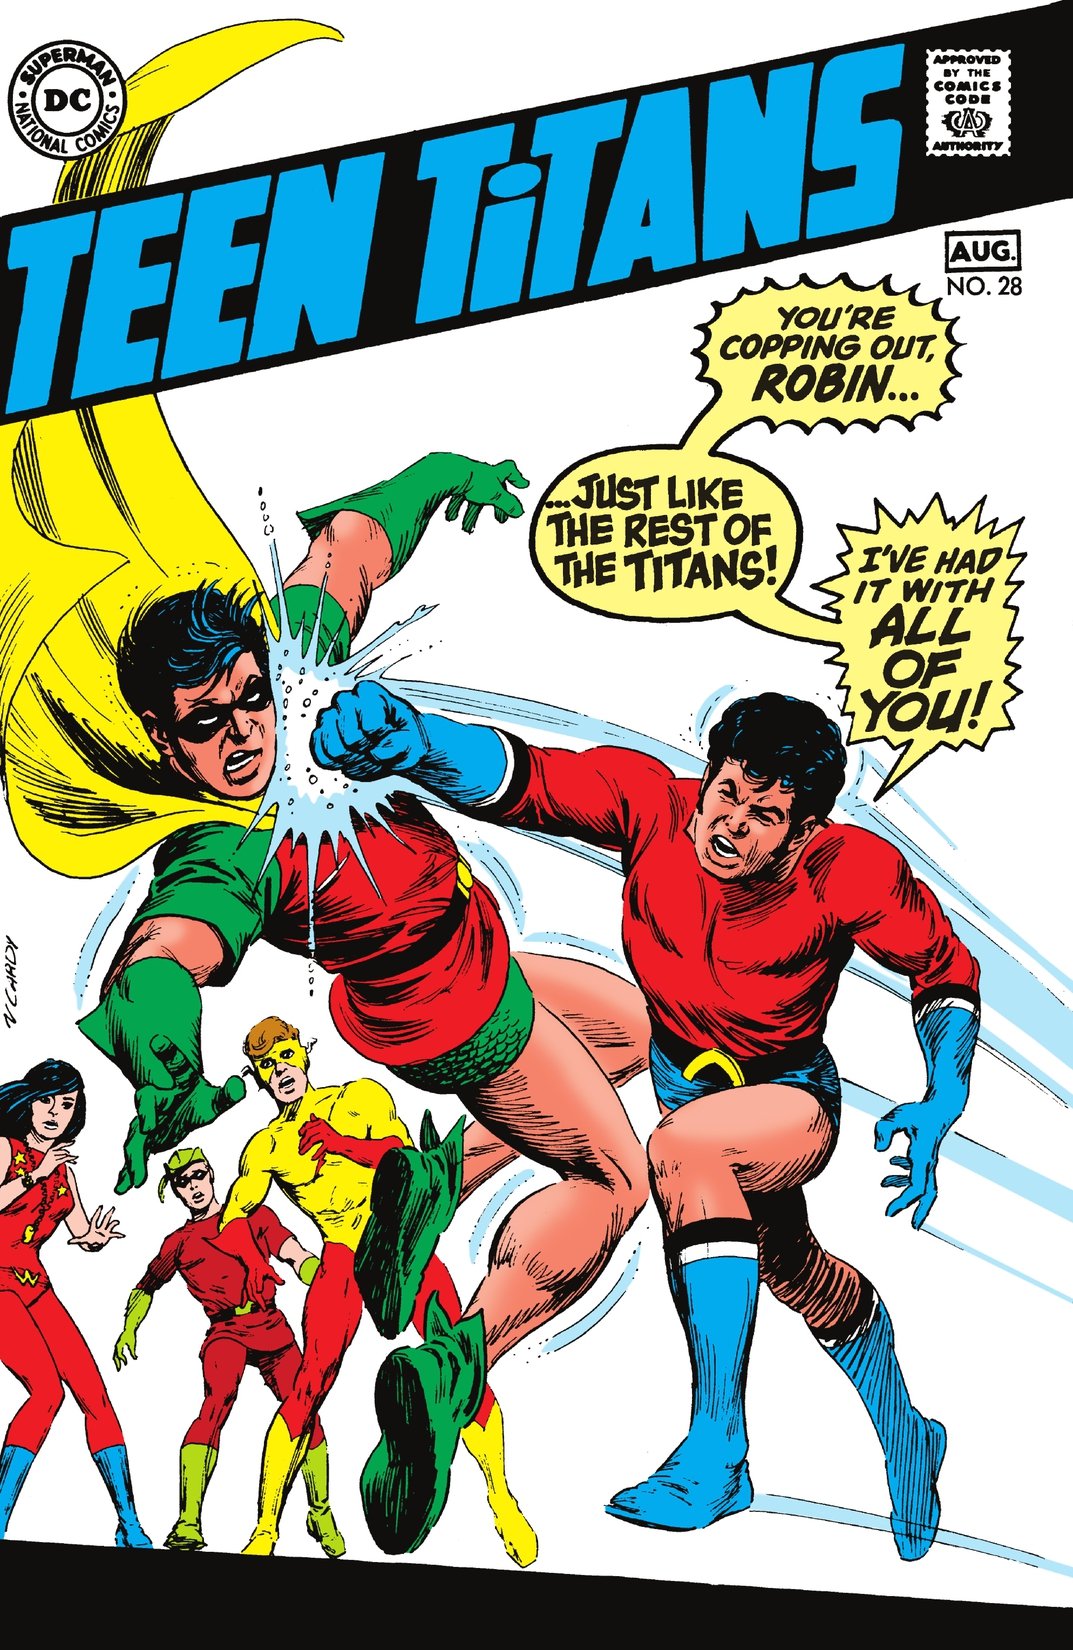 Original Teen Titans cover issue #28 from 1970